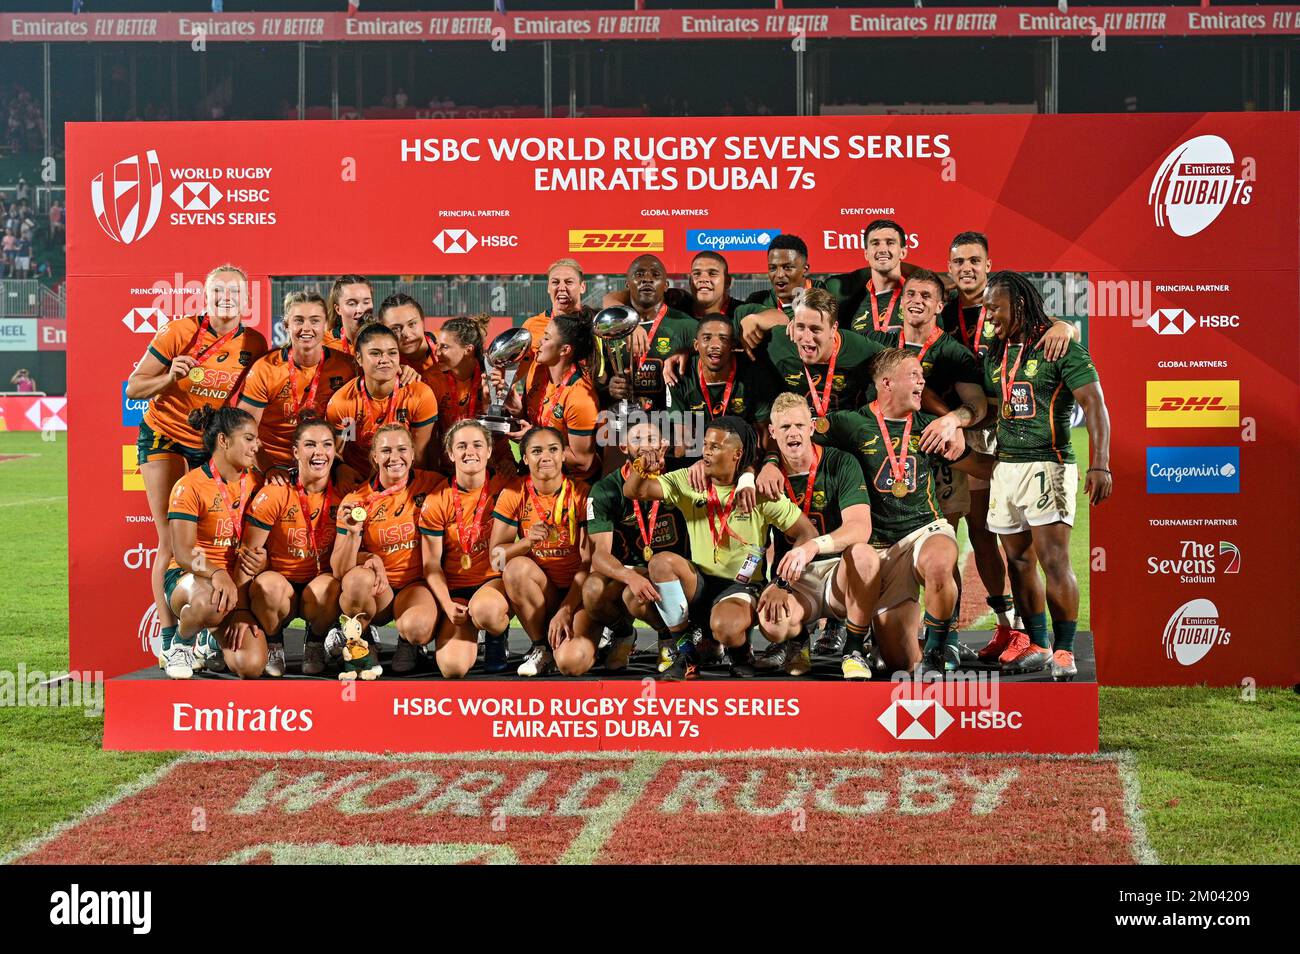 DUBAI, UAE, 3rd Dec 2022. The Australian Women’s team and South African men's team pose for pictures after their victories at the 2022 Dubai Rugby 7s. The event is part of the 2022 HSBC World Rugby Sevens Series Credit: Feroz Khan/Alamy Live News Stock Photo